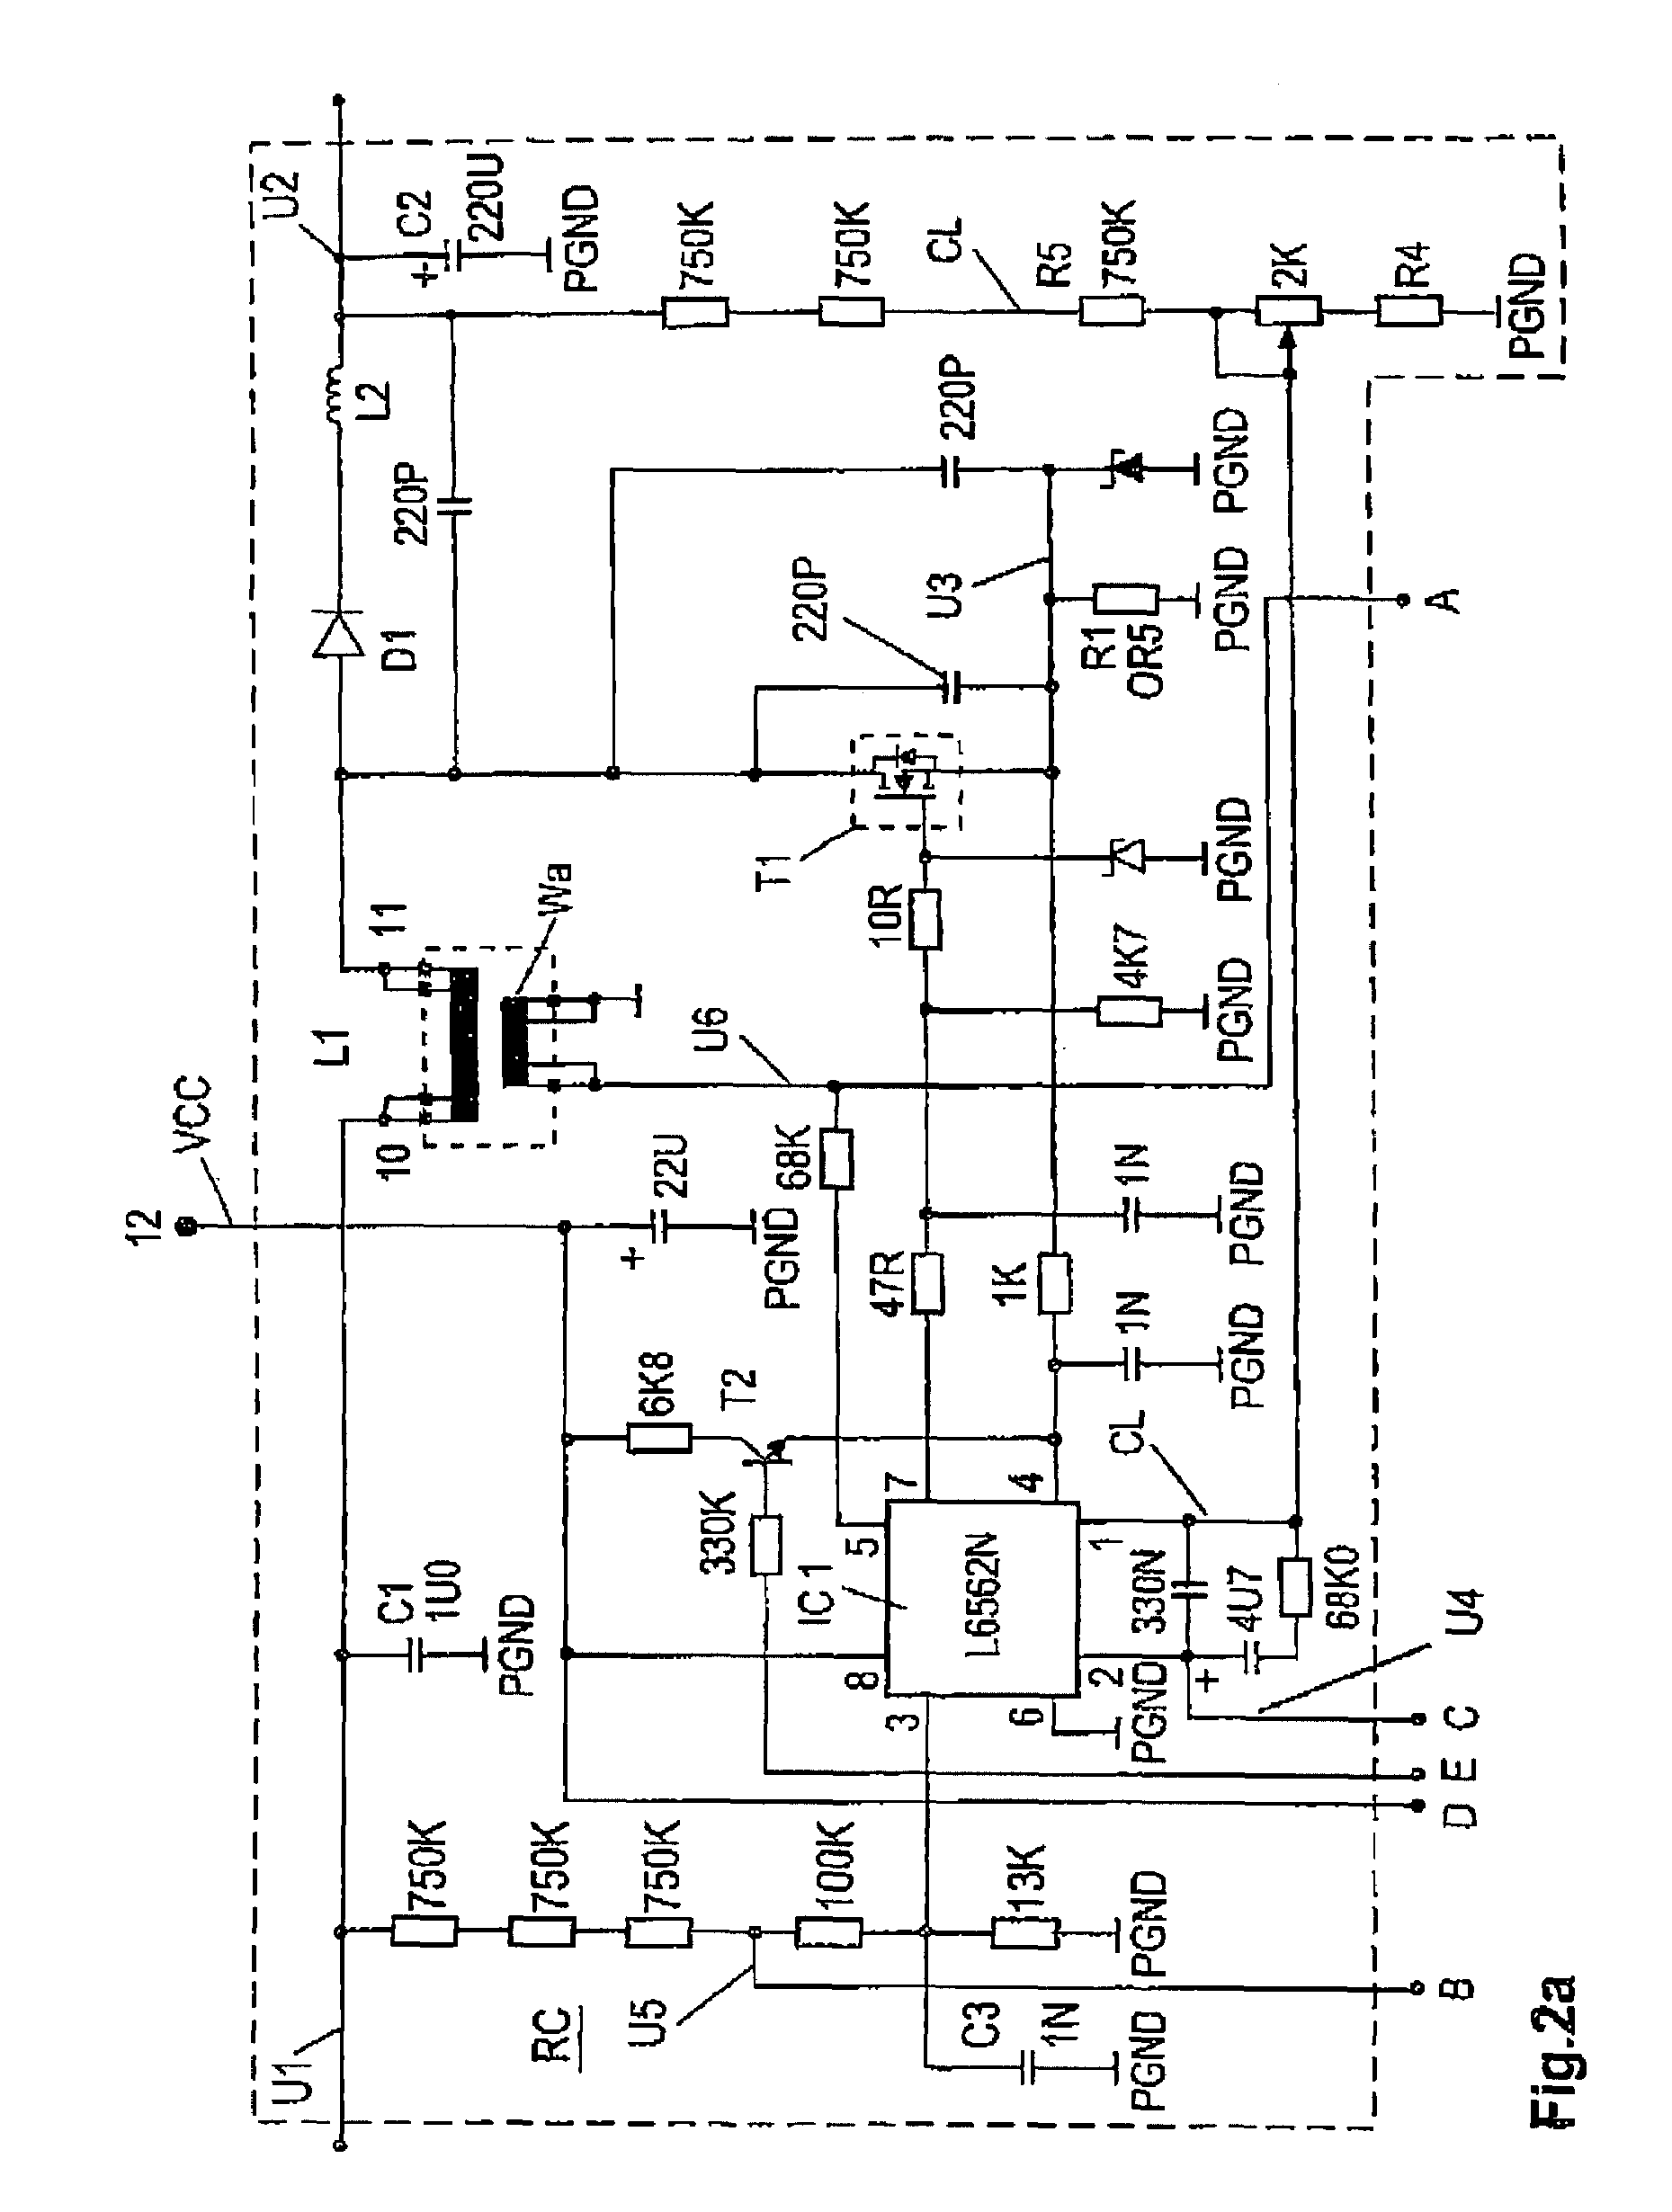 Over-voltage protection circuit for a switched mode power supply